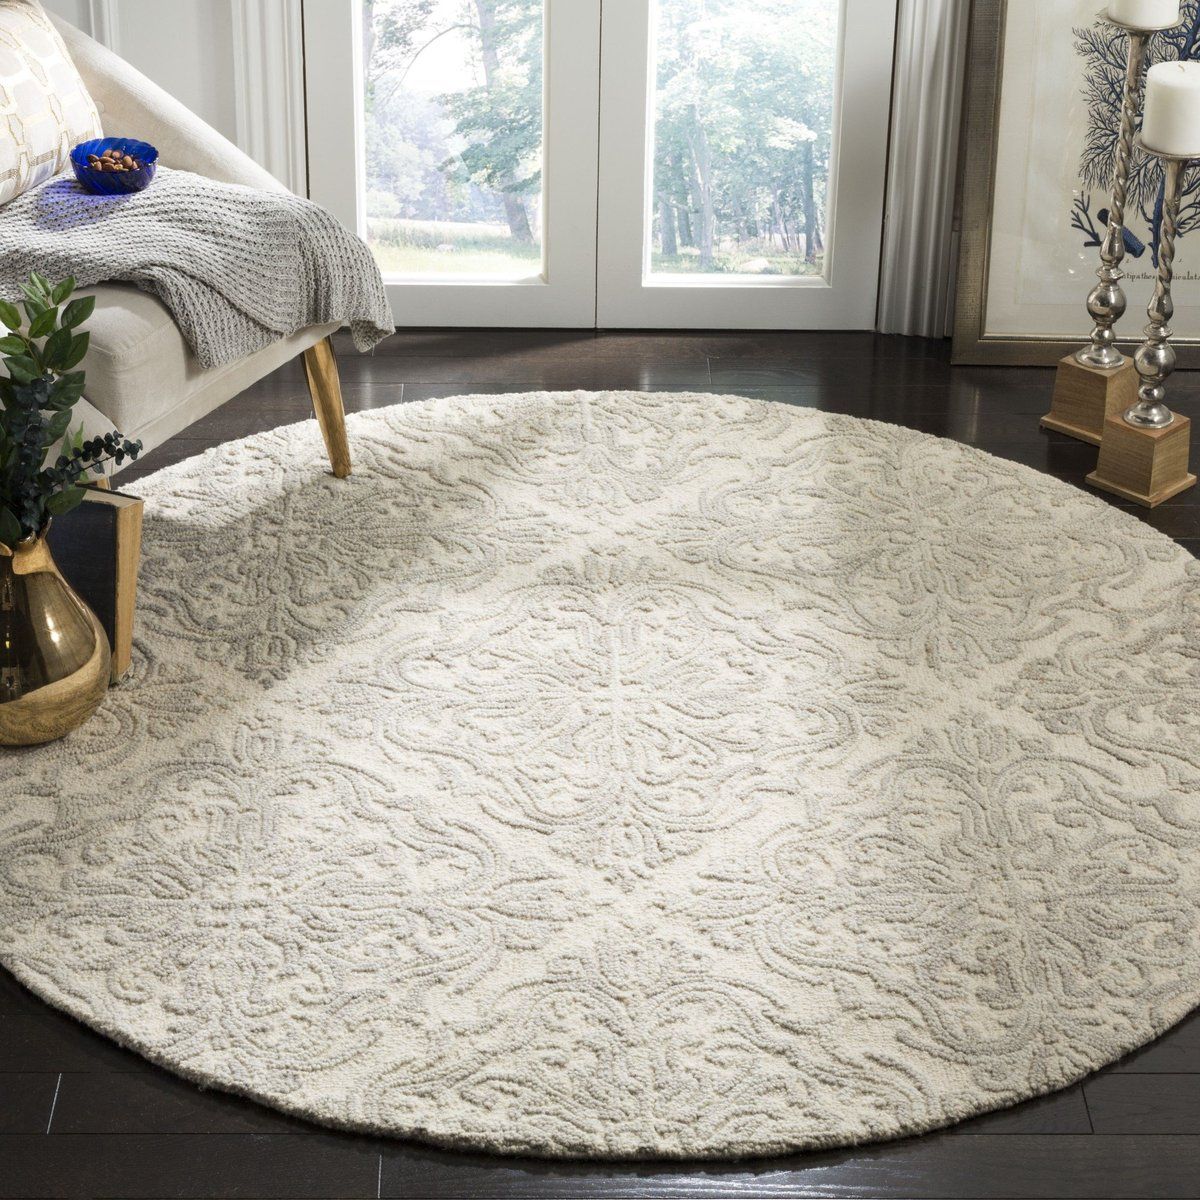 Safavieh Blossom Blm 103 Rugs | Rugs Direct Regarding Ivory Blossom Oval Rugs (View 3 of 15)